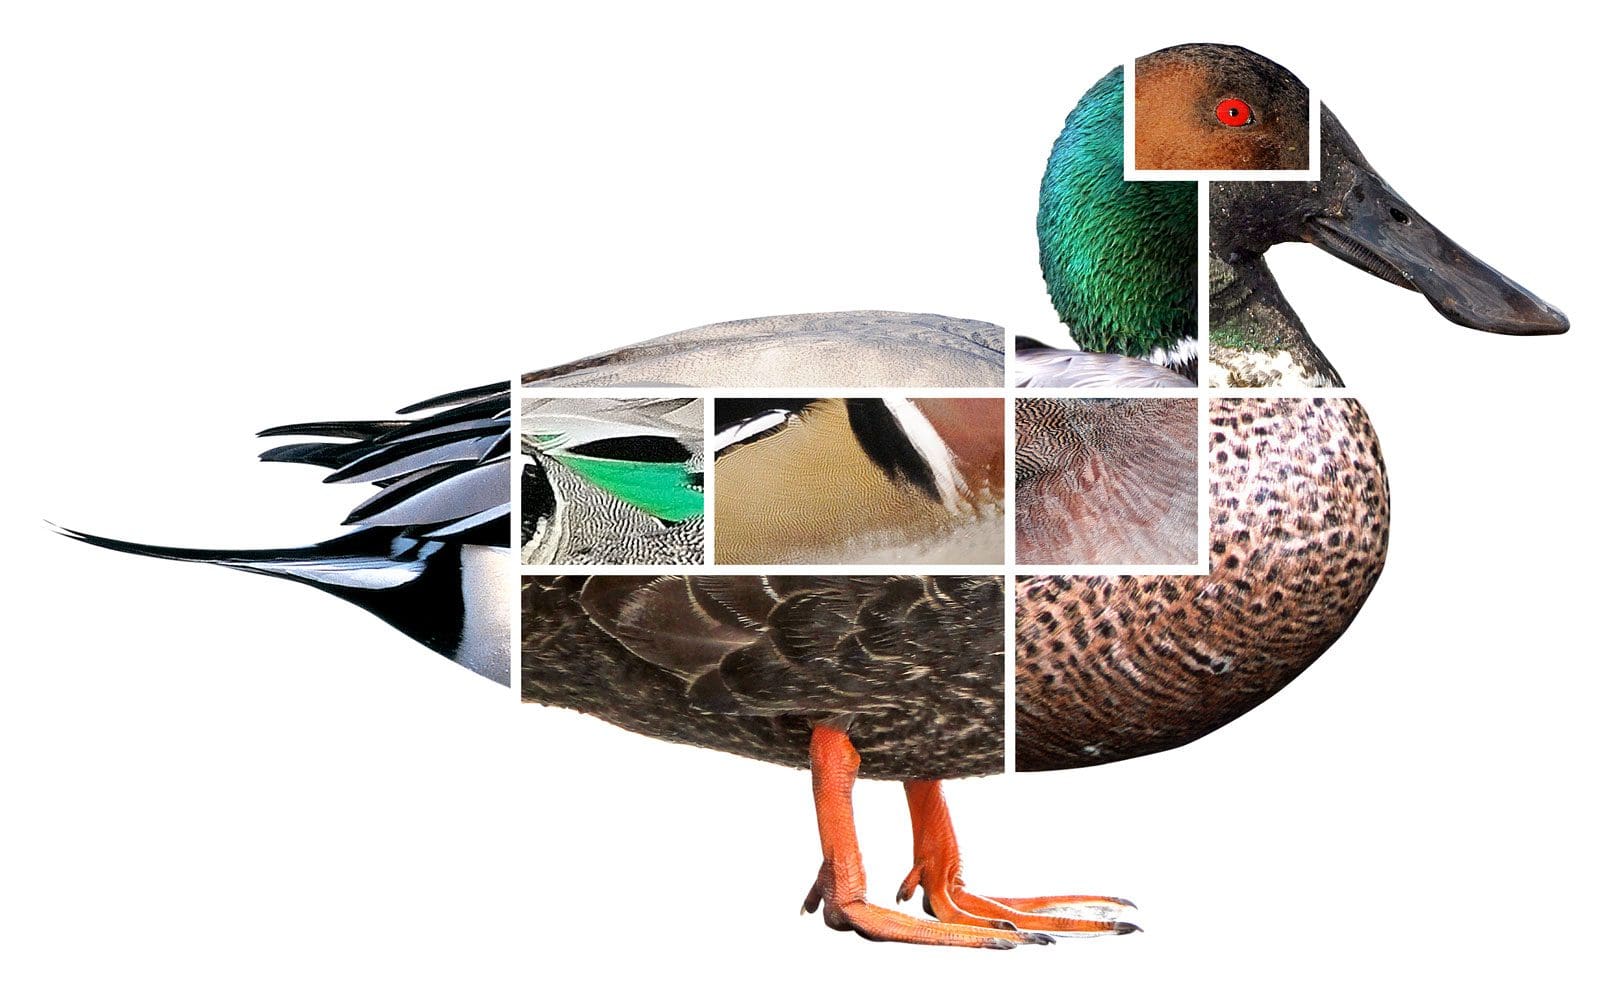 Ducks from a distance: helpful hints for identification in the wild